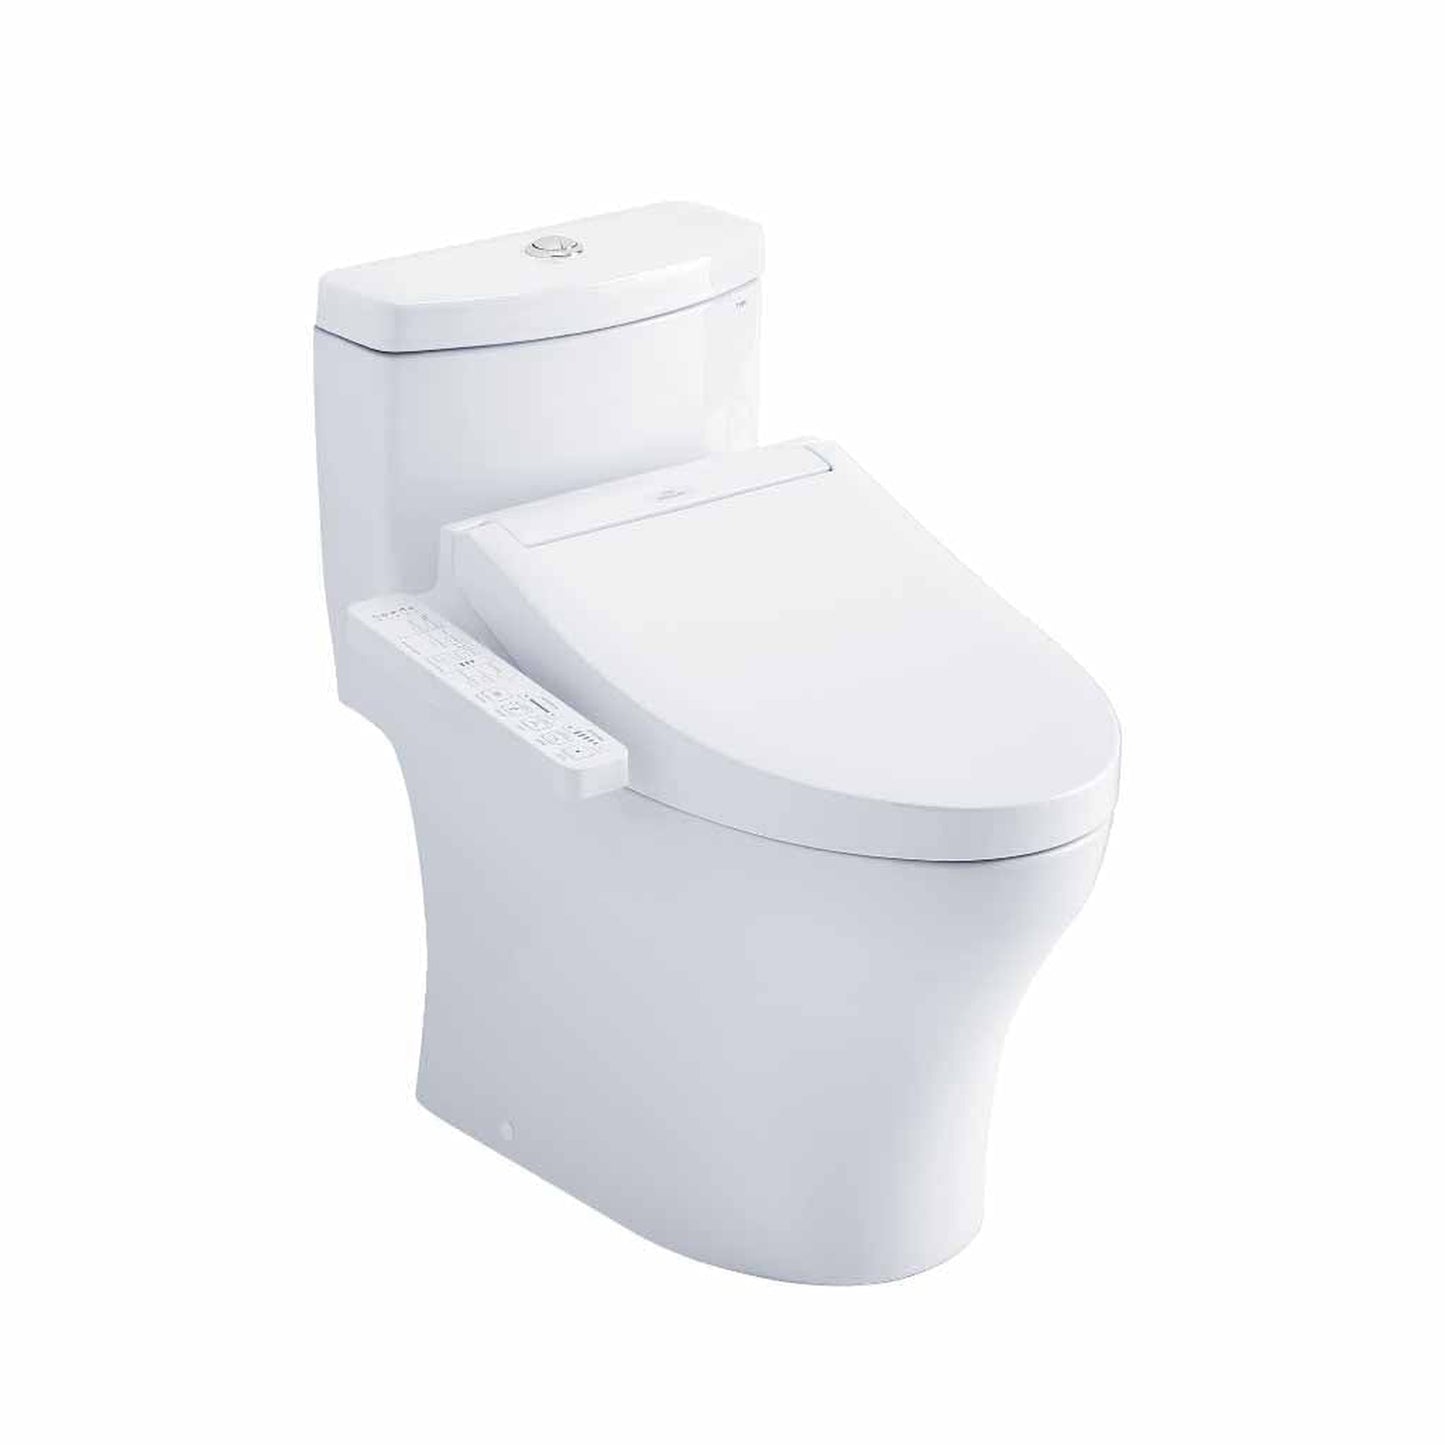 TOTO Aquia IV Cotton White 1.28 GPF & 0.8 GPF Dual-Flush Two-Piece Elongated Chair Height Toilet With WASHLET+ C2